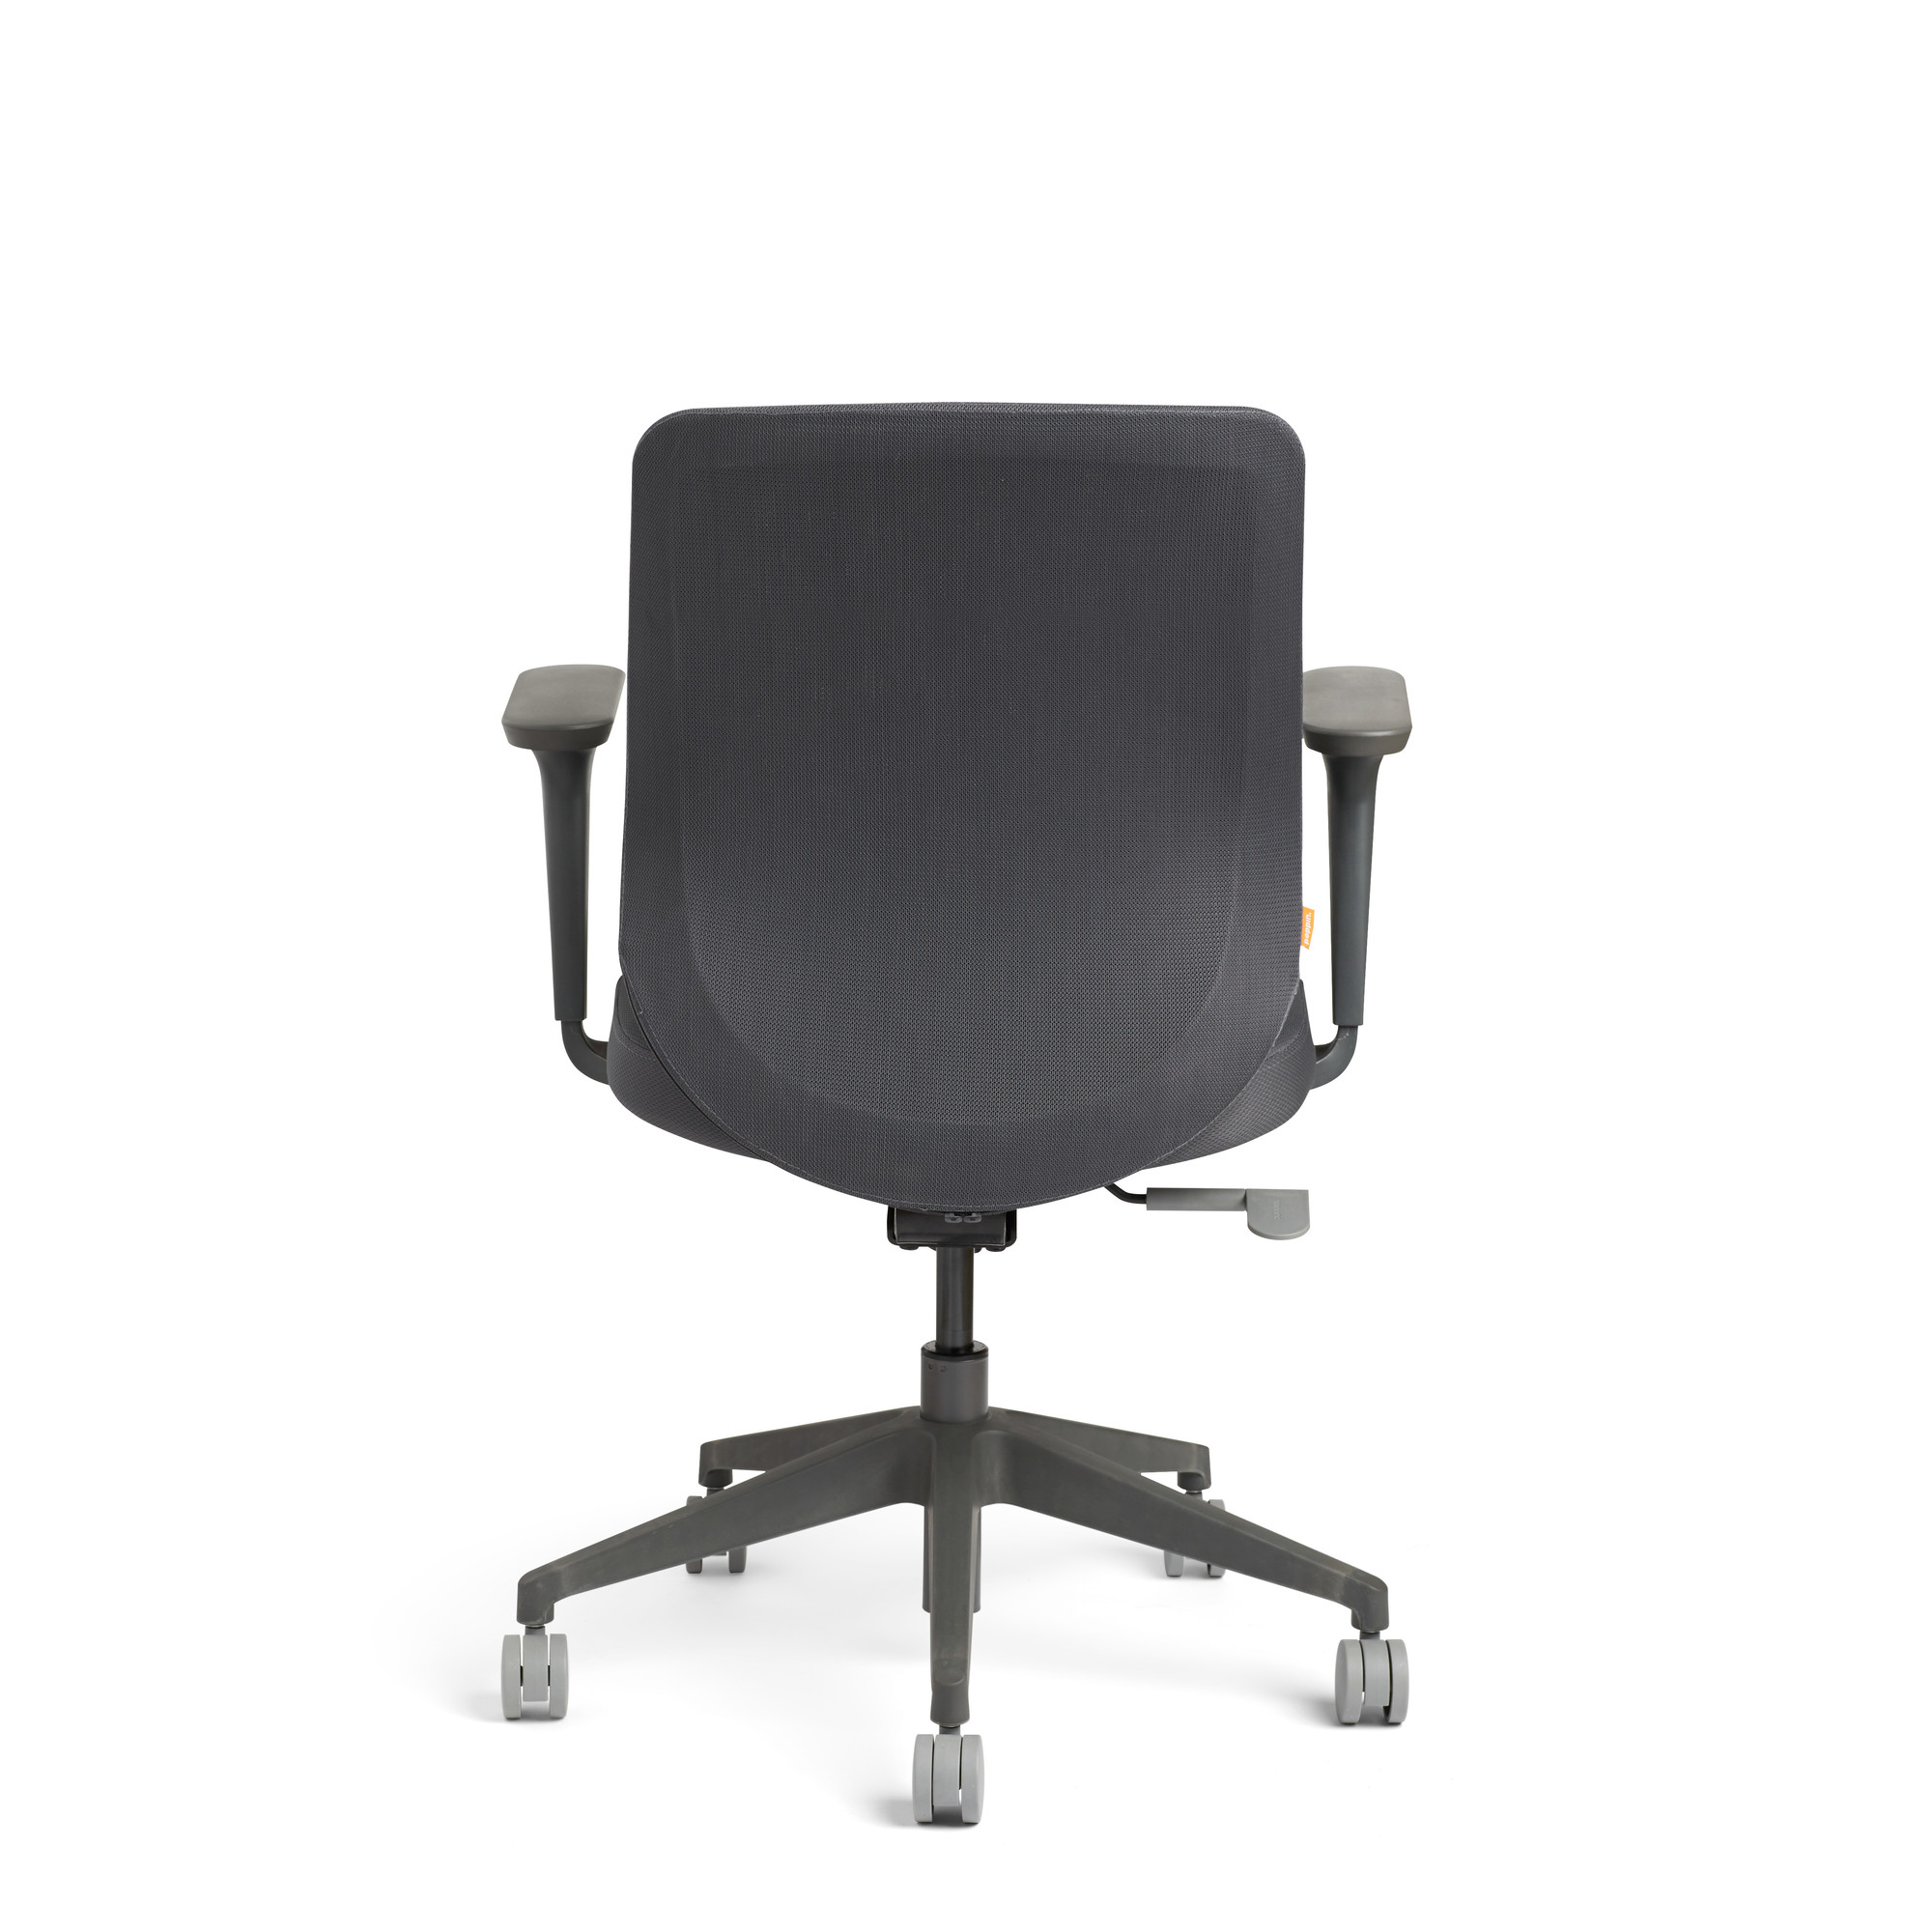 https://poppin.imgix.net/products/sept_2016/poppin_charcoal_max_task_chair_4.jpg